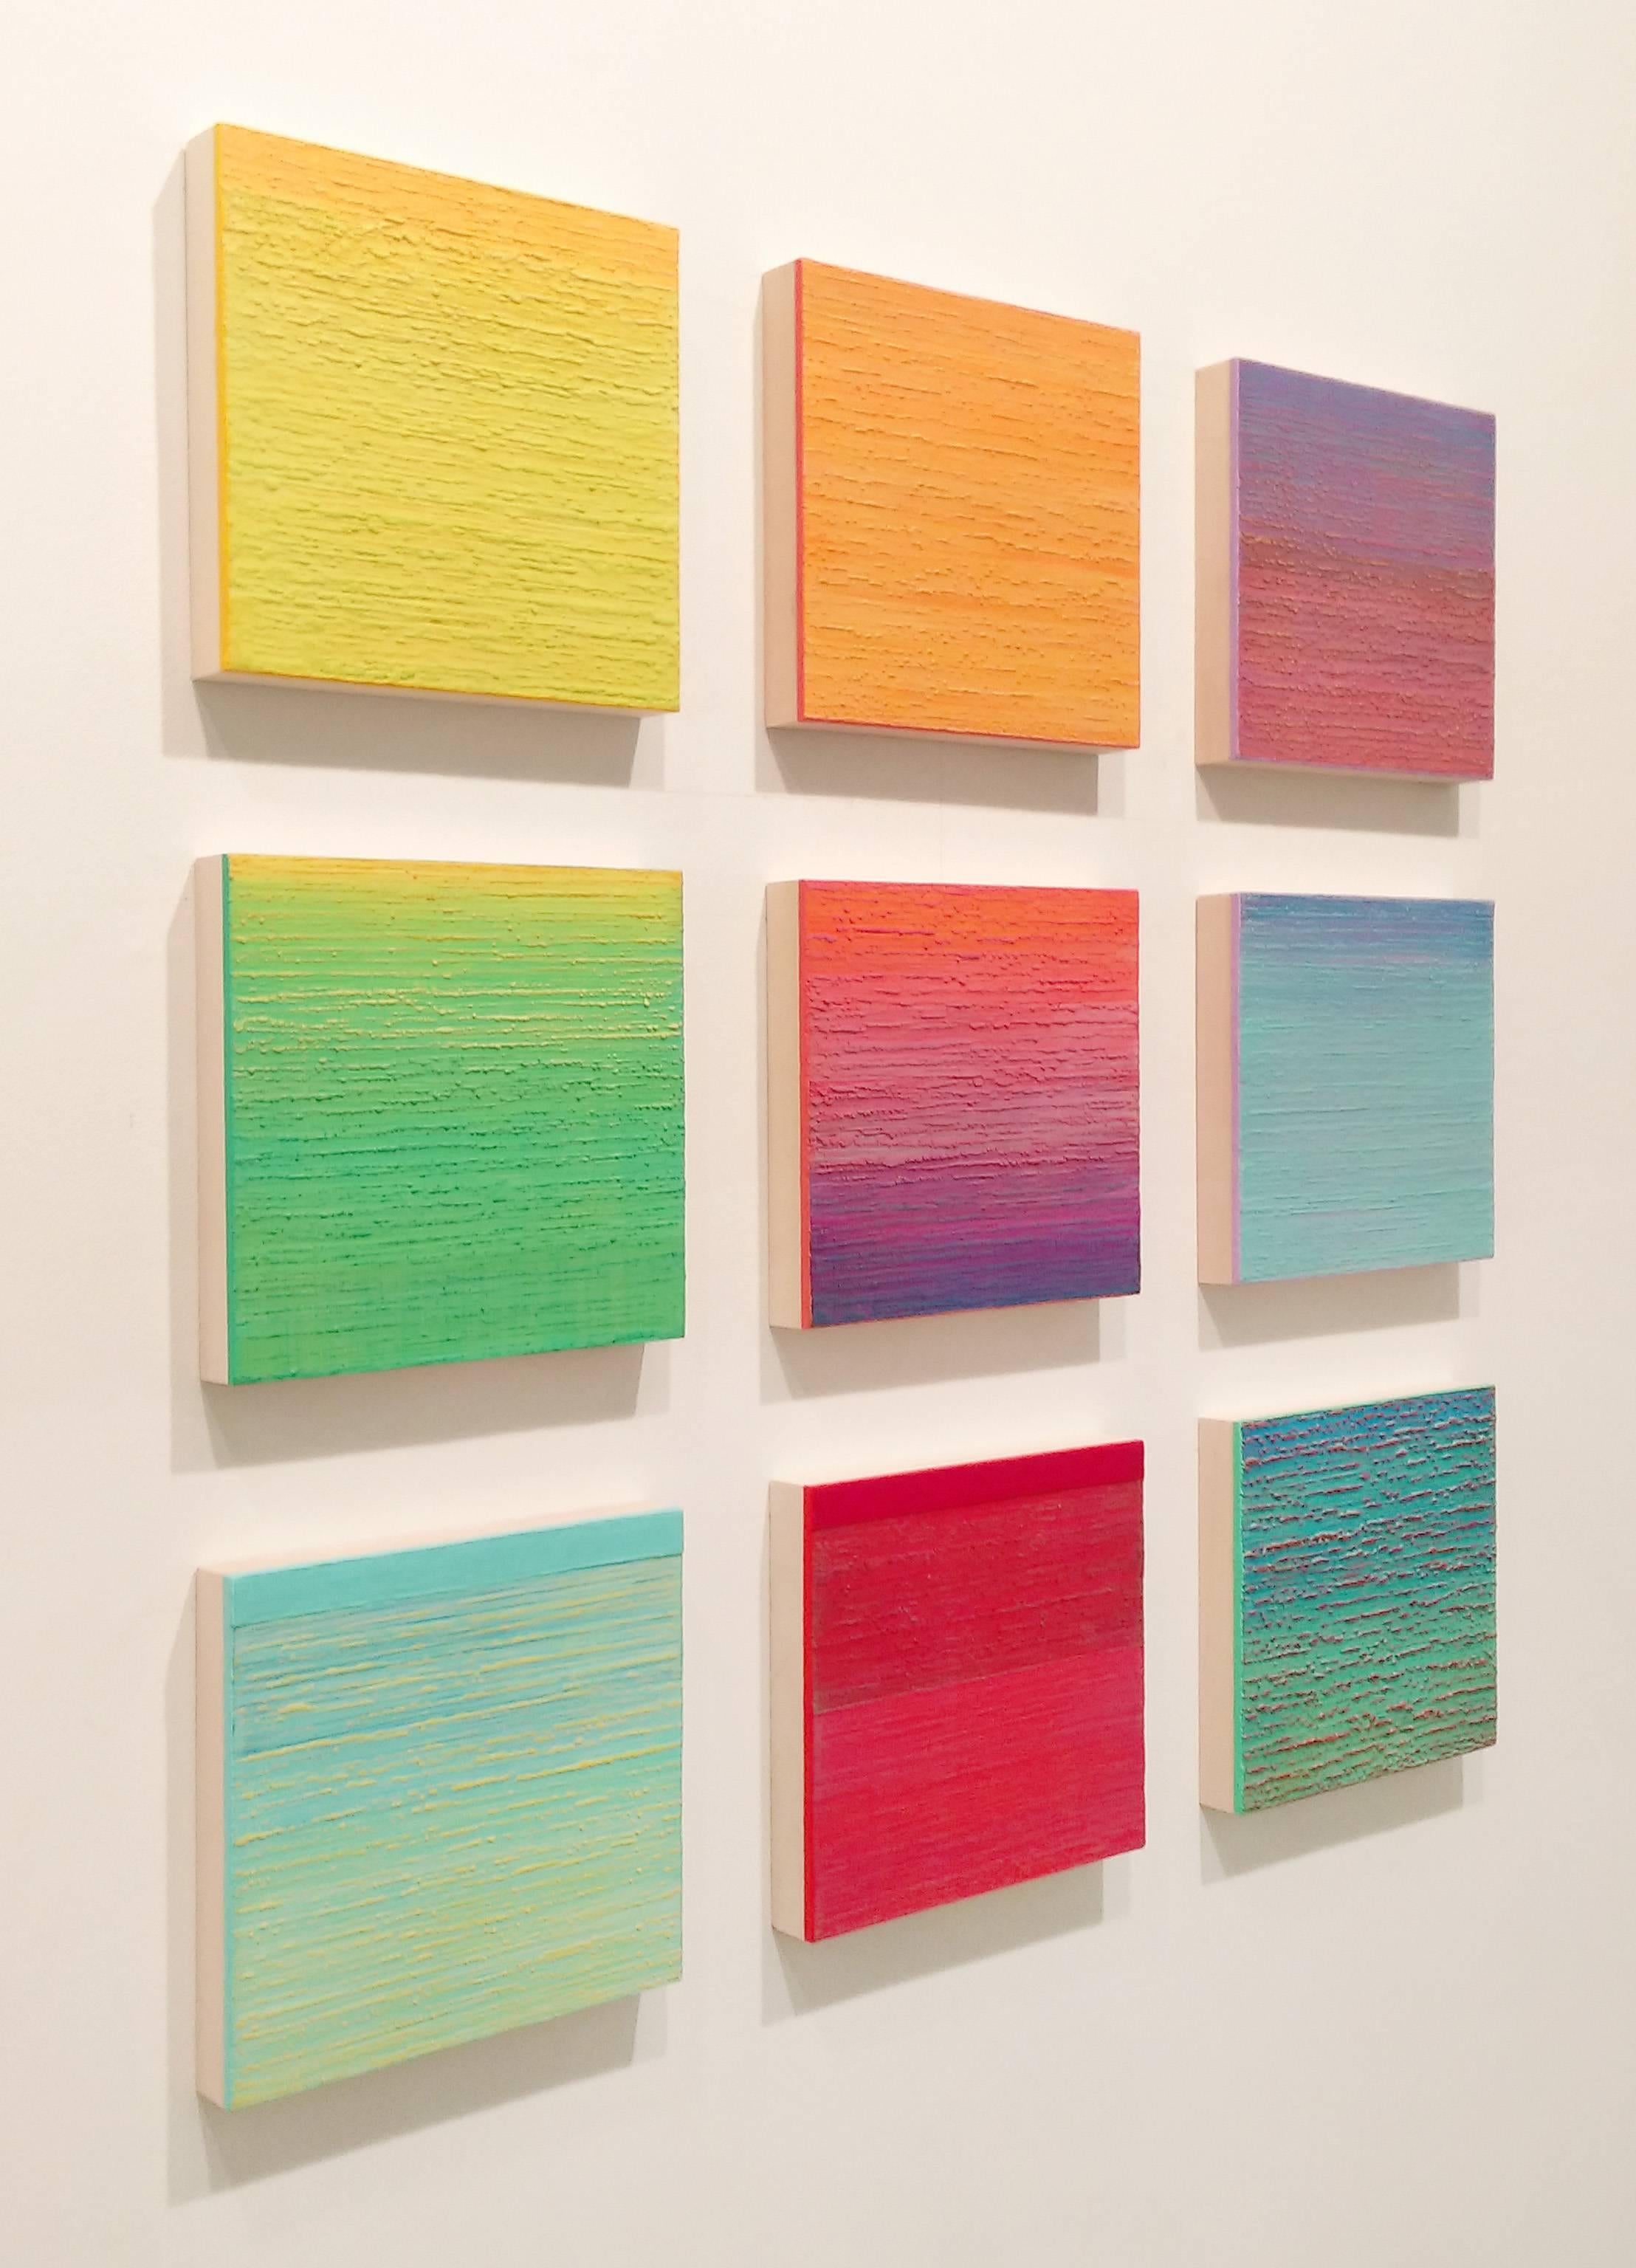 Joanne Mattera's Silk Road 367 is primarily orange and metallic yellow.

Succulent in color and reductive or repetitive in composition, Joanne Mattera’s ongoing Silk Road series of paintings are achieved by manipulating layers of translucent wax and